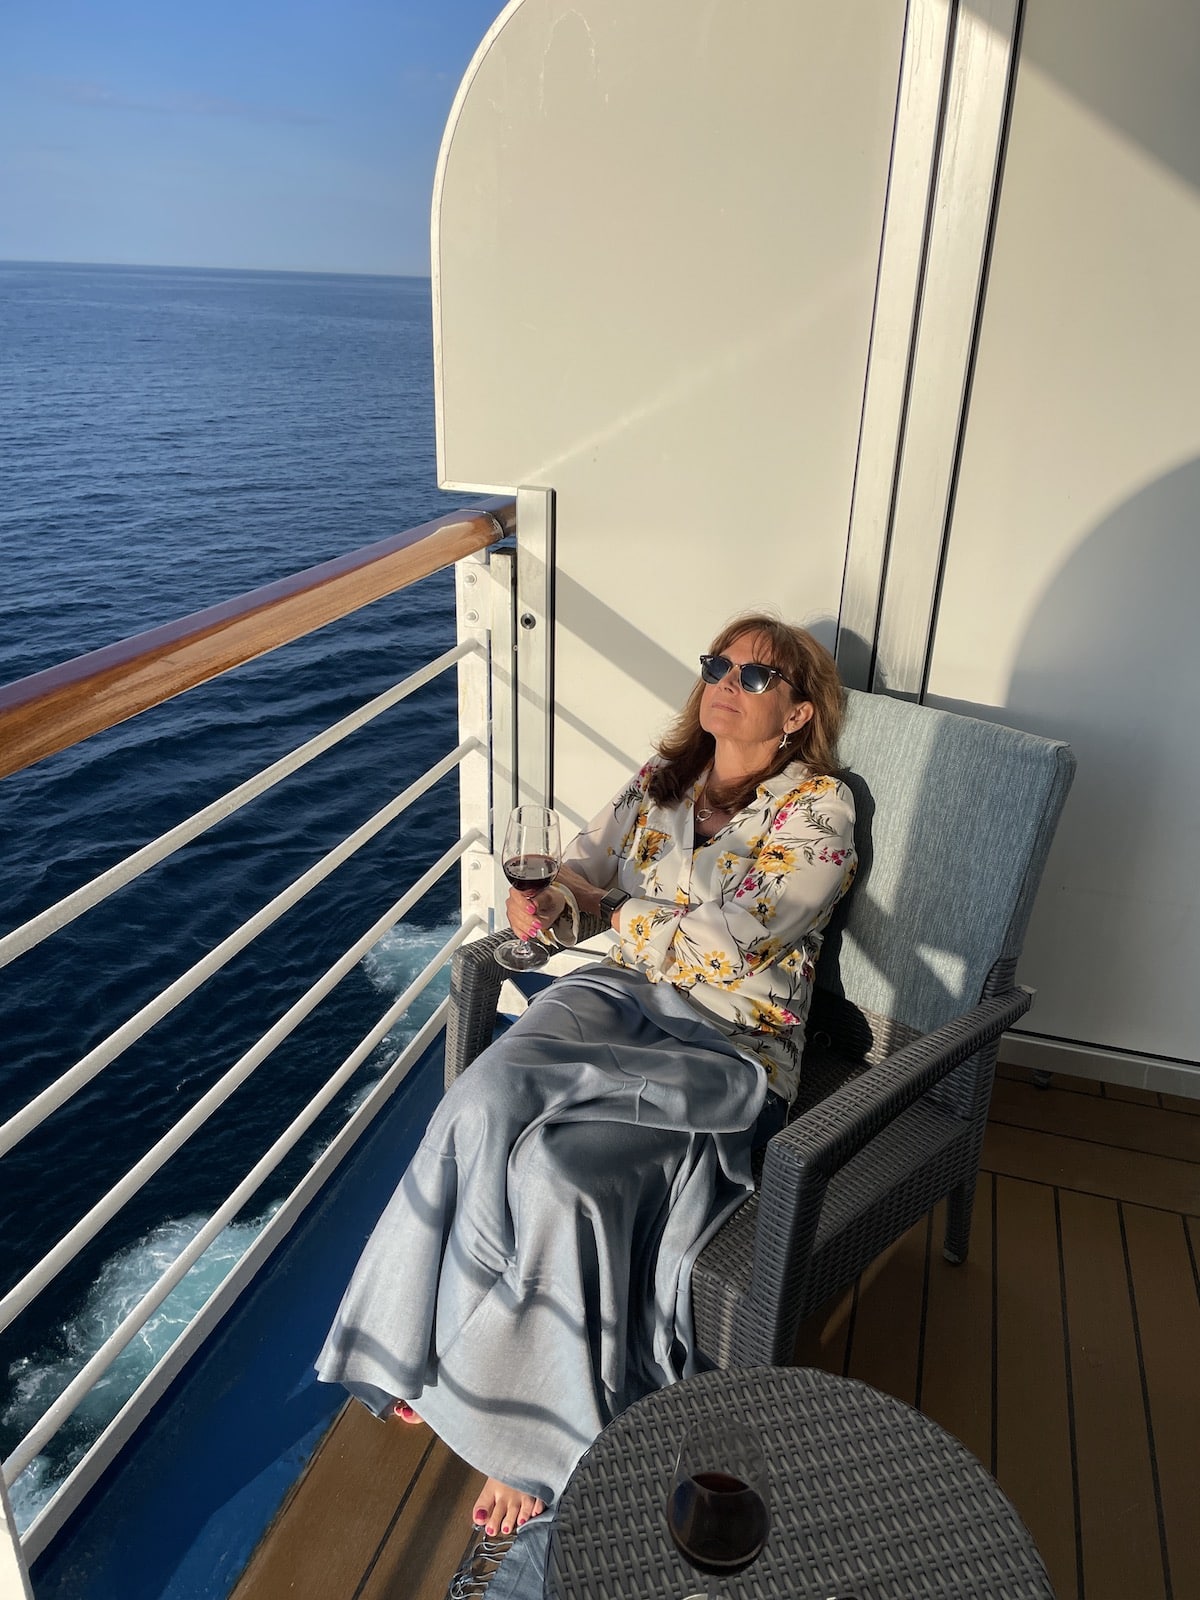 Woman in chair on cruise ship balcony.